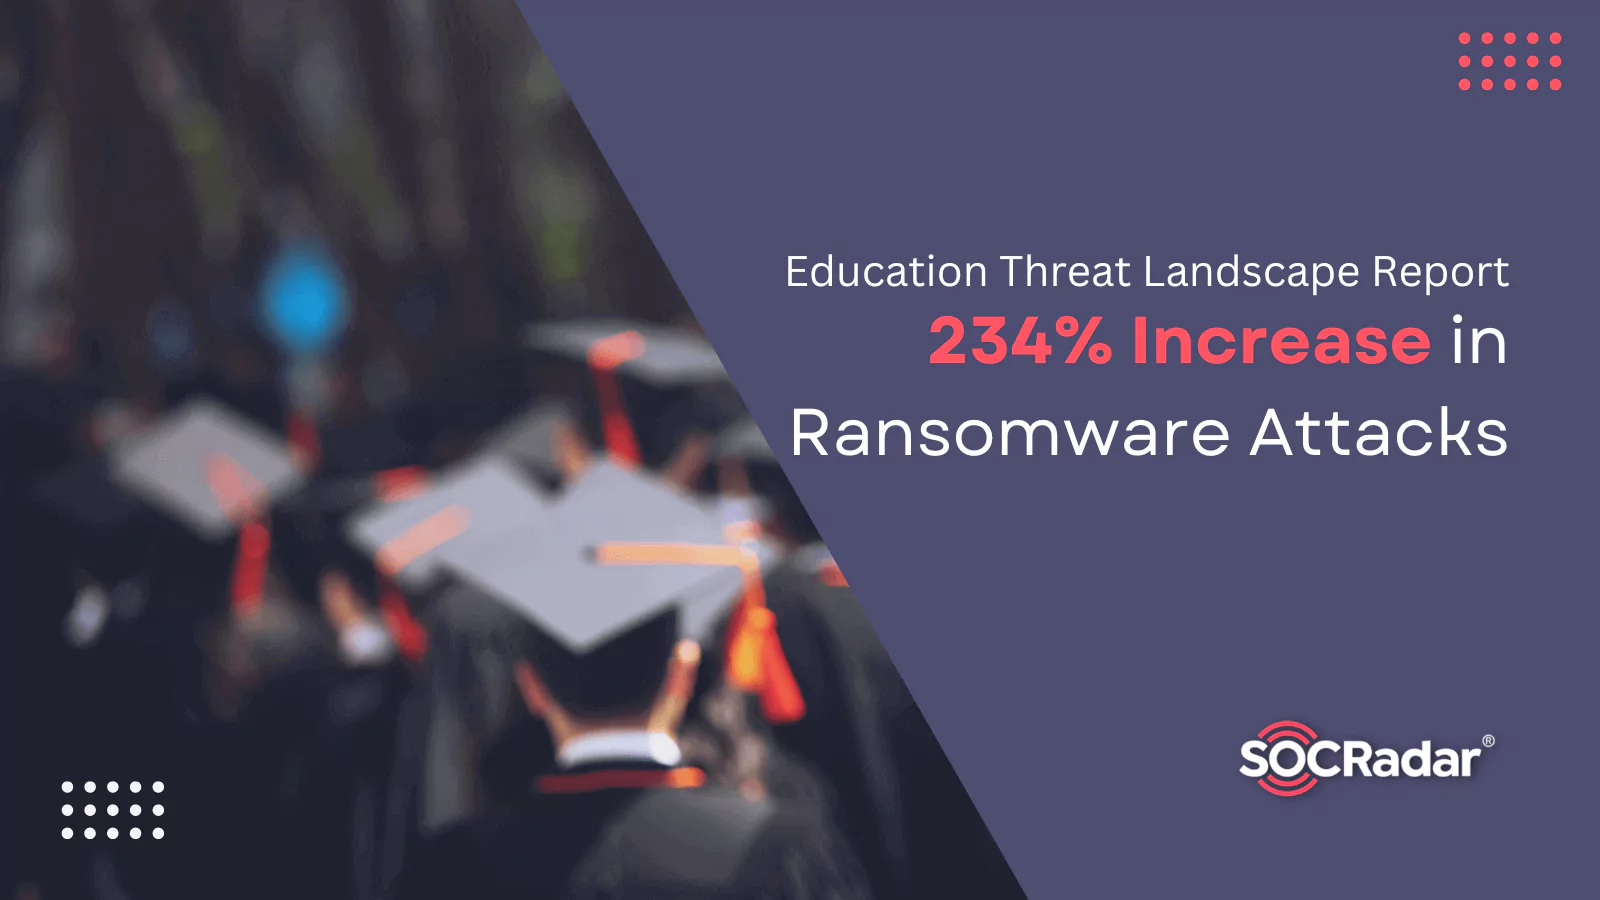 SOCRadar® Cyber Intelligence Inc. | Educational Institutions Face 234% Increase in Ransomware Attacks